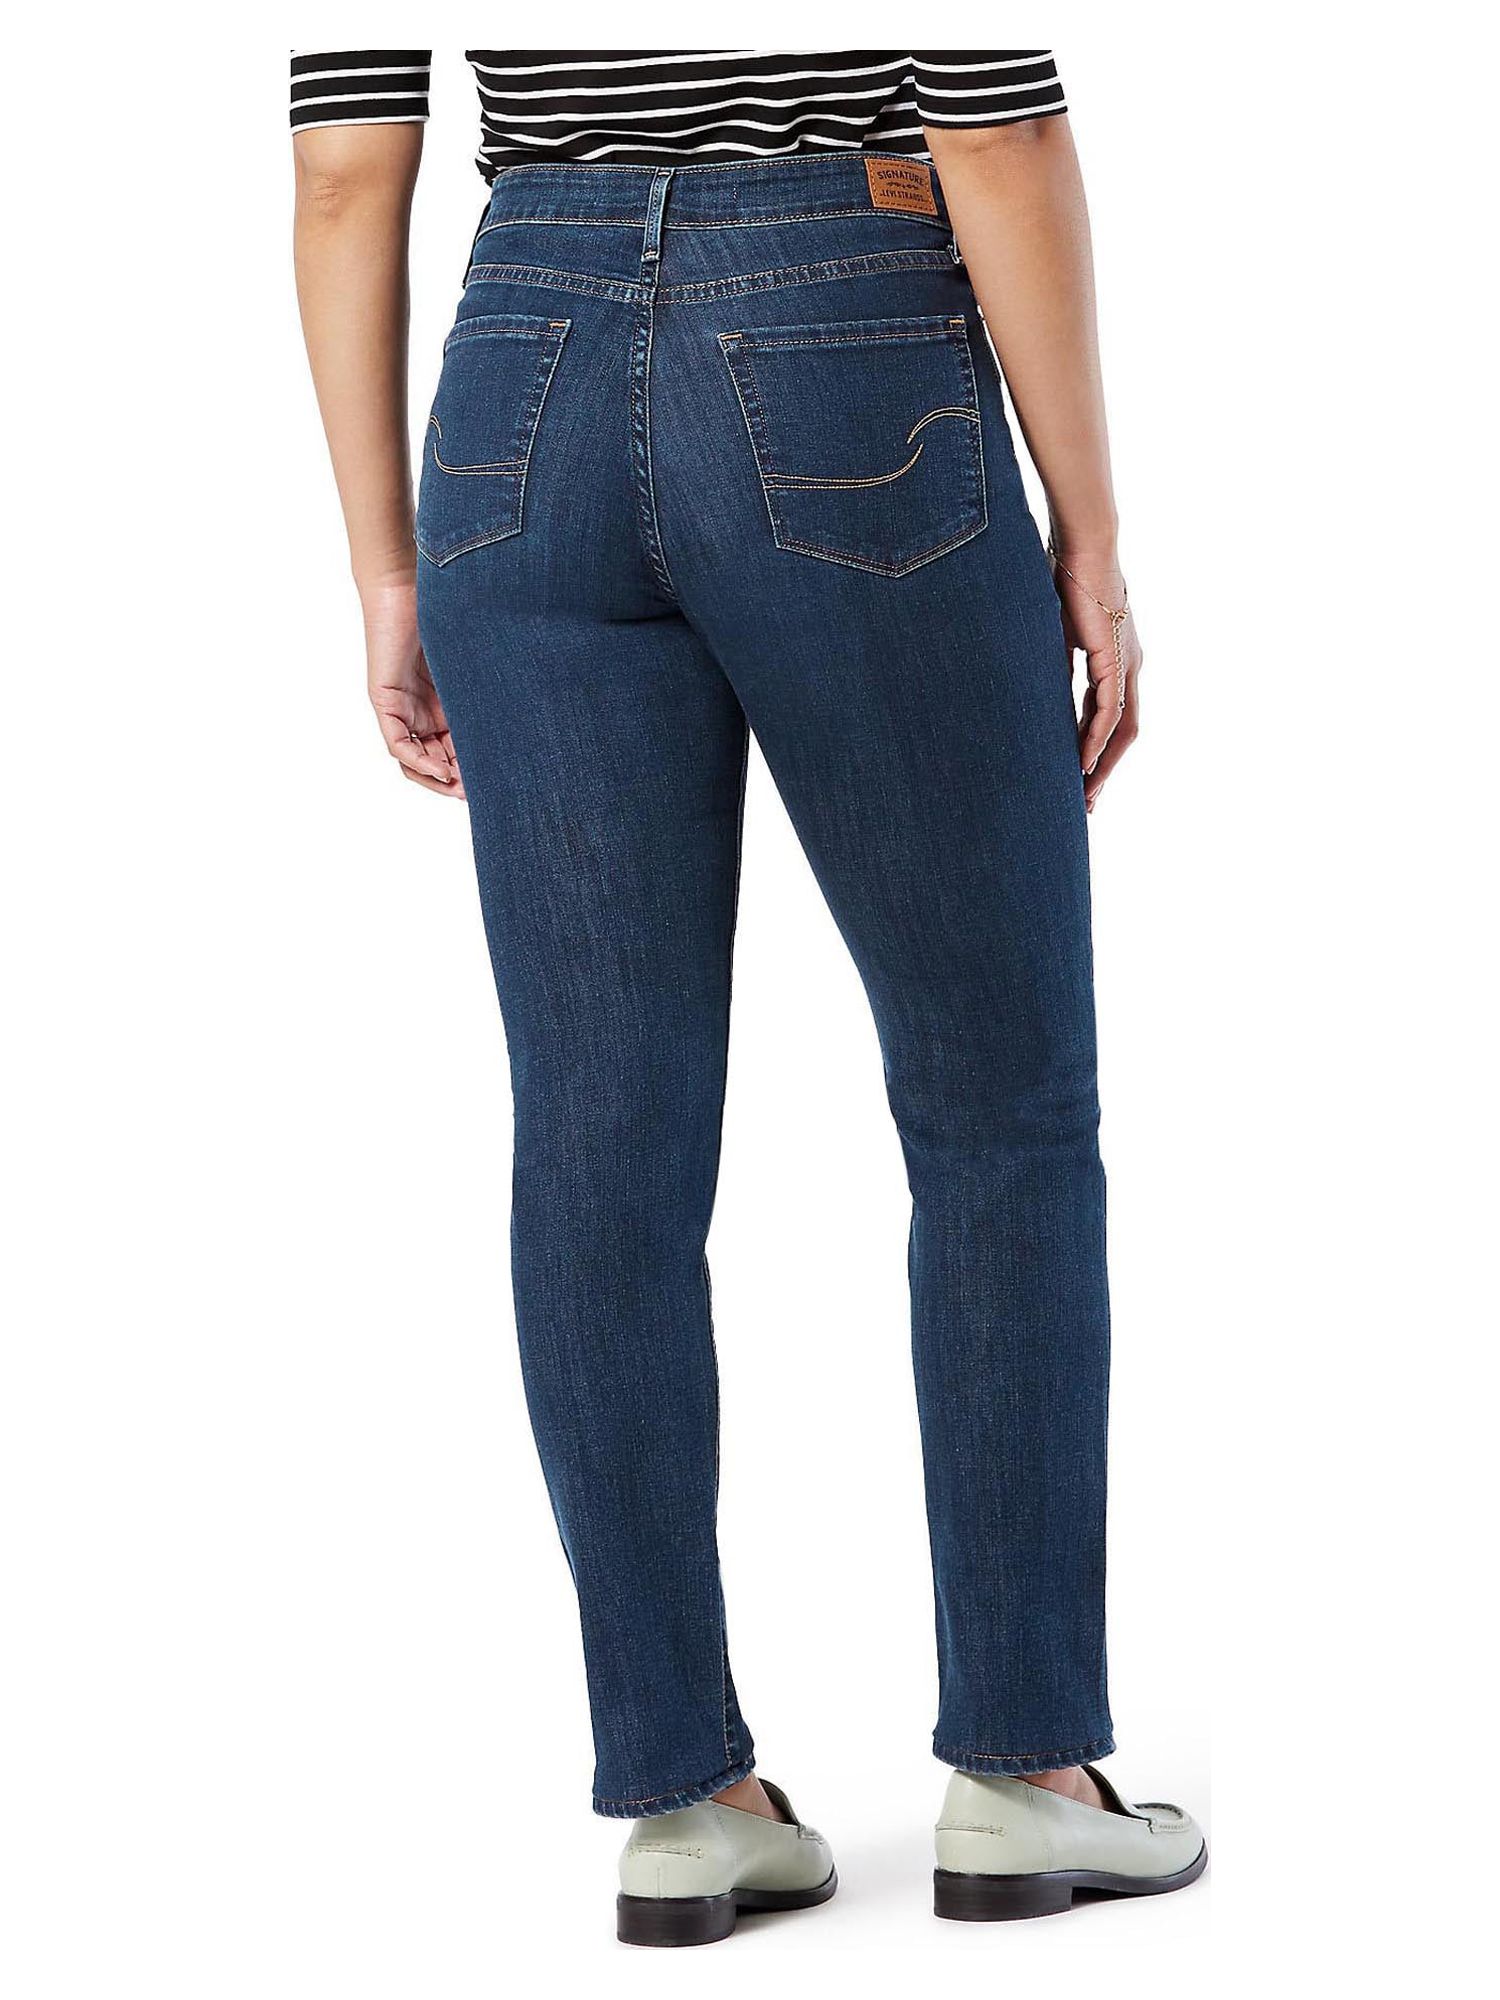 Signature by Levi Strauss & Co. Women's and Women's Plus Size Mid Rise Modern Straight Jeans, Sizes 2-28 - image 2 of 8